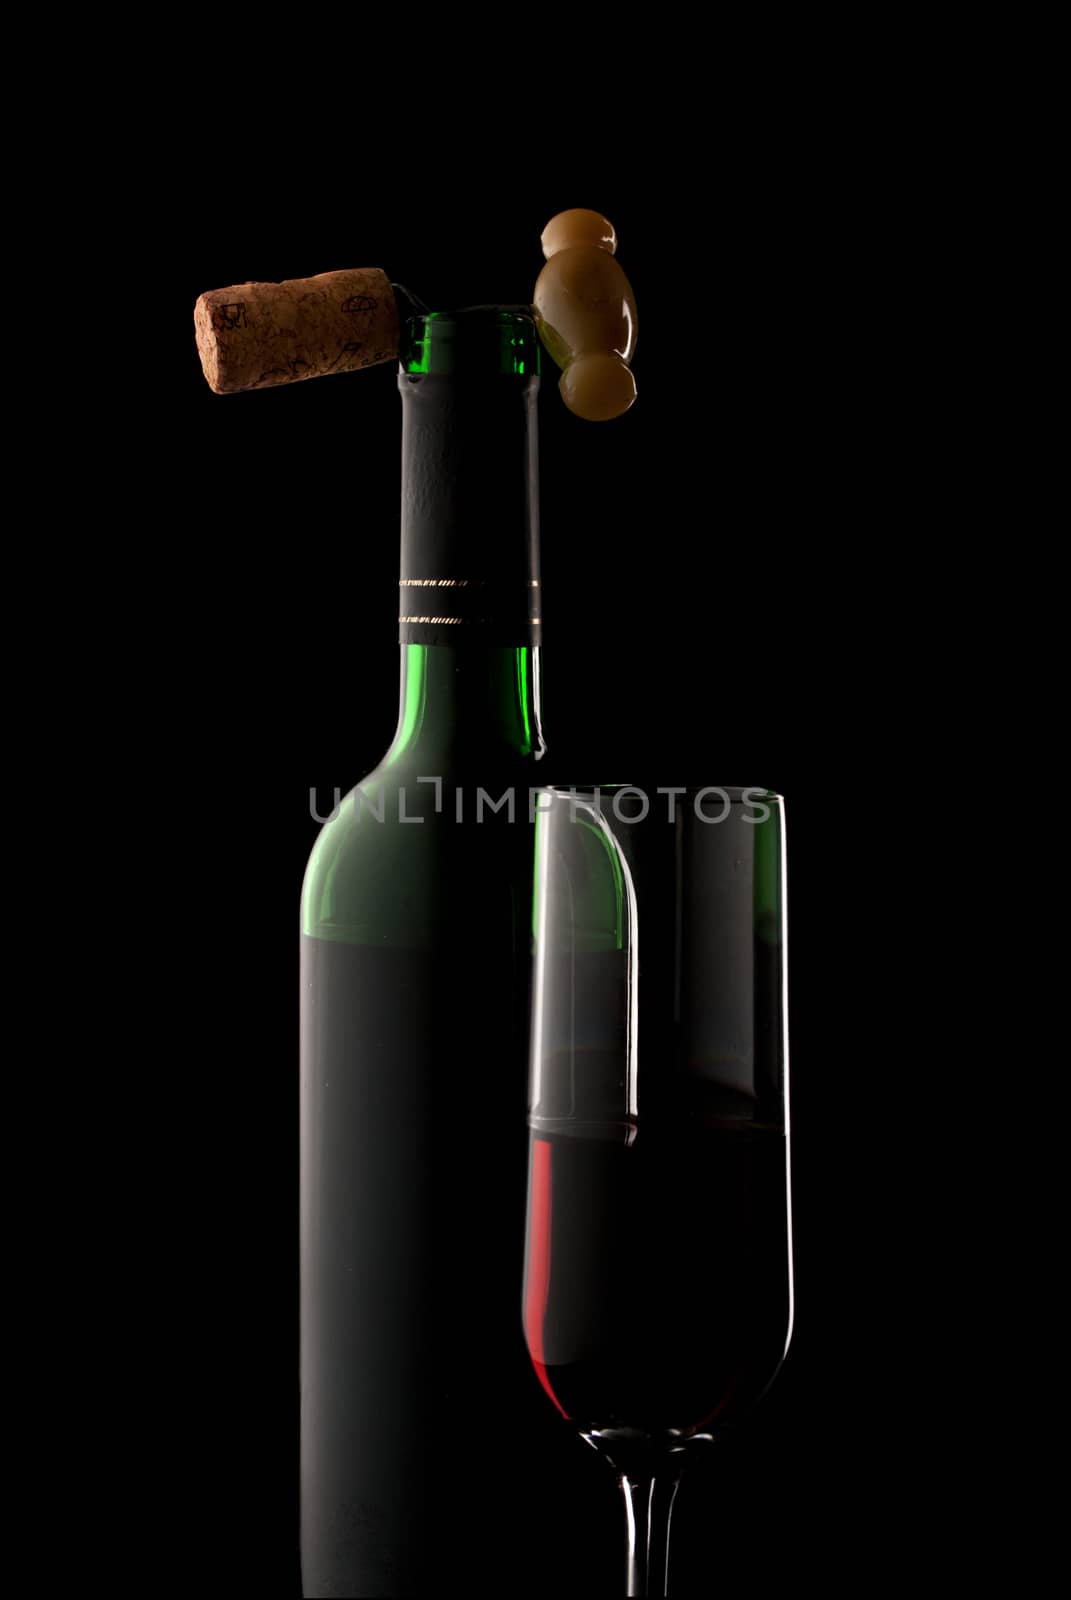 Bottle and glass of wine in black